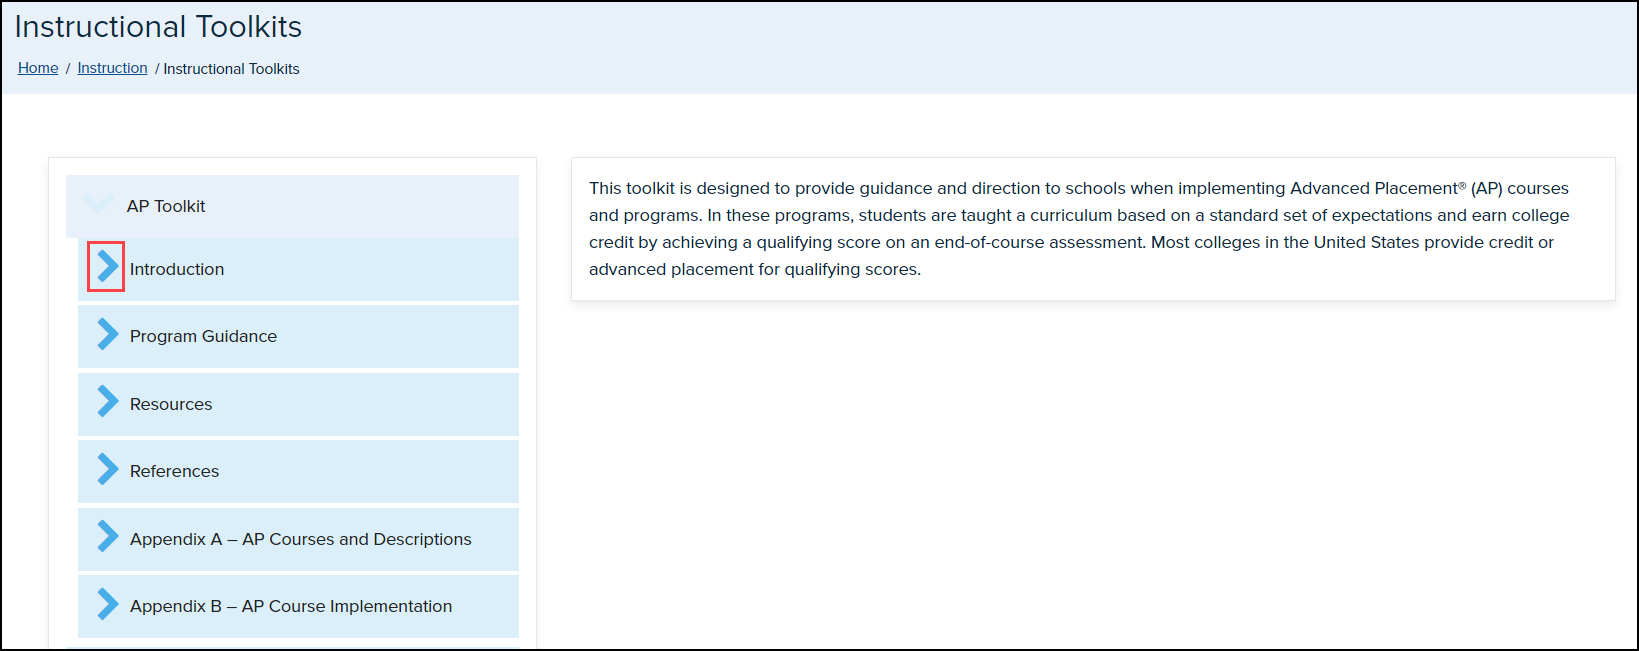 instructional toolkits menu with A P toolkit menu expanded and introduction drop down arrow highlighted